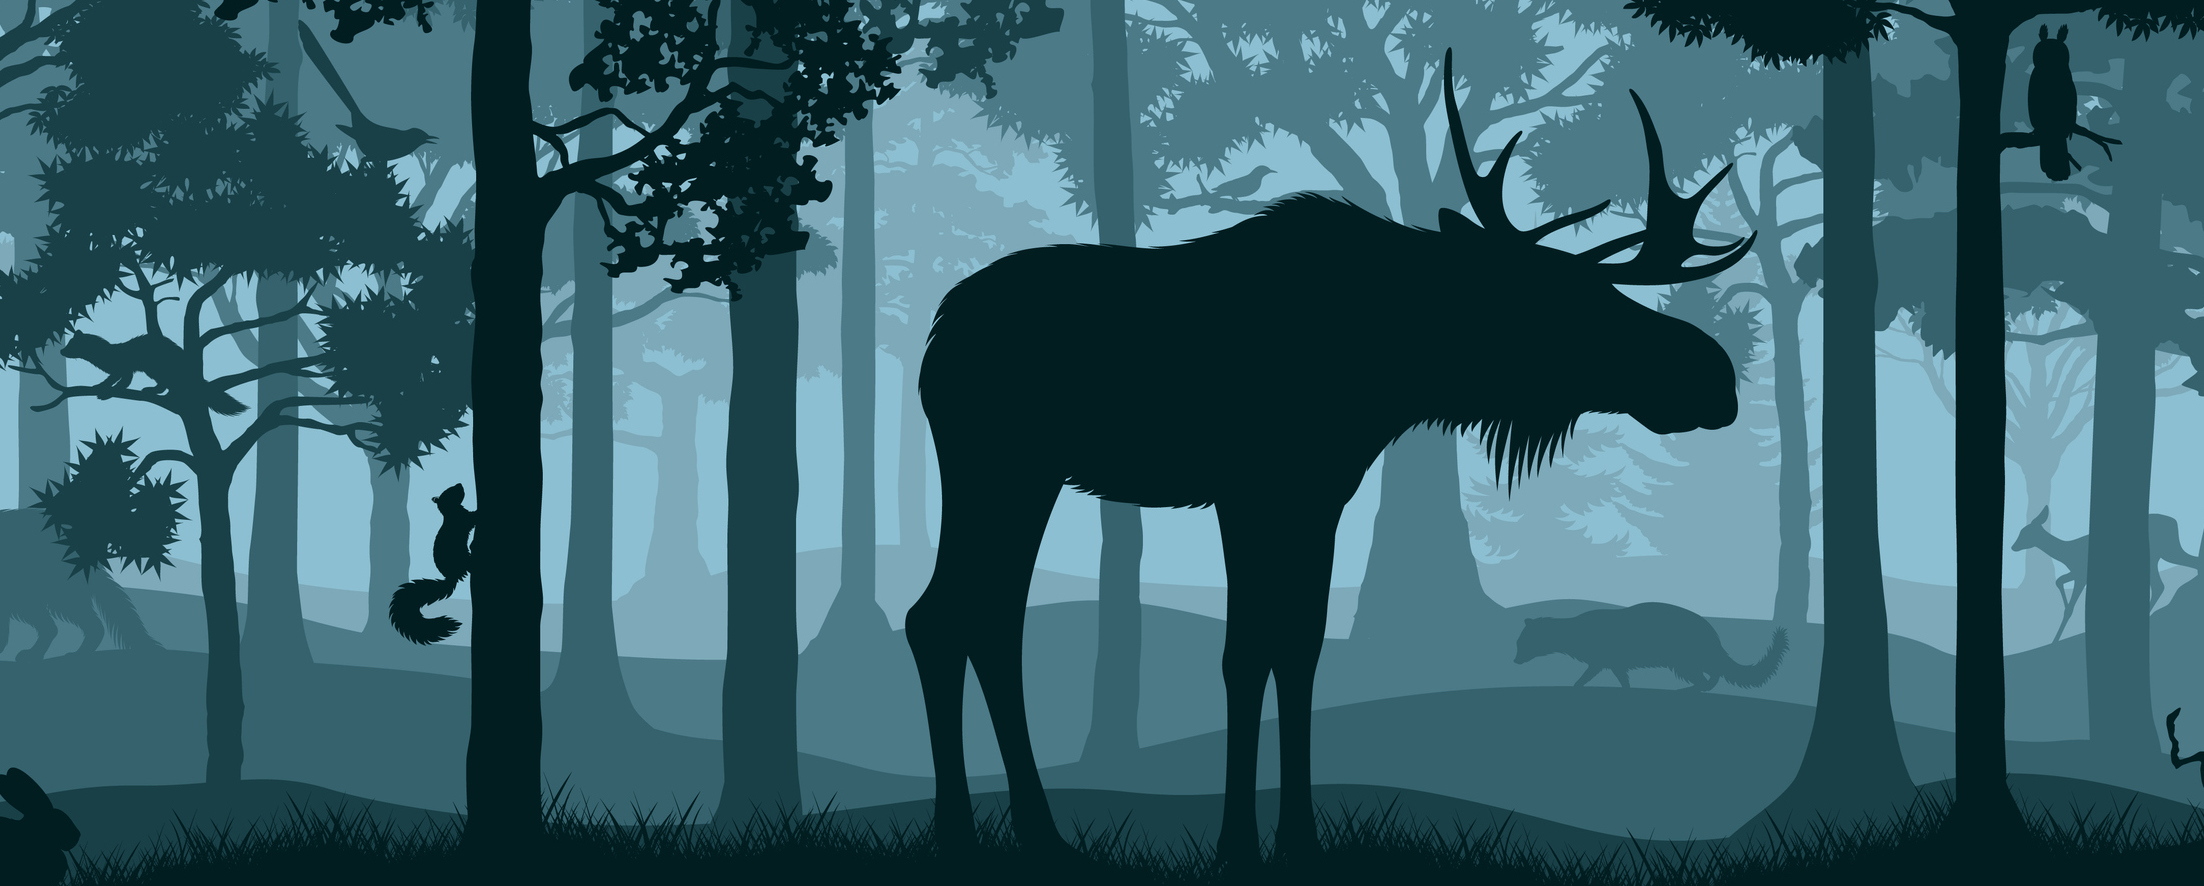 moody blue and black monochrome illustration of a moose in the woods. Behind him is a squirrel, a beaver, an owl, and a deer. moose are one of canada's most noble animals.